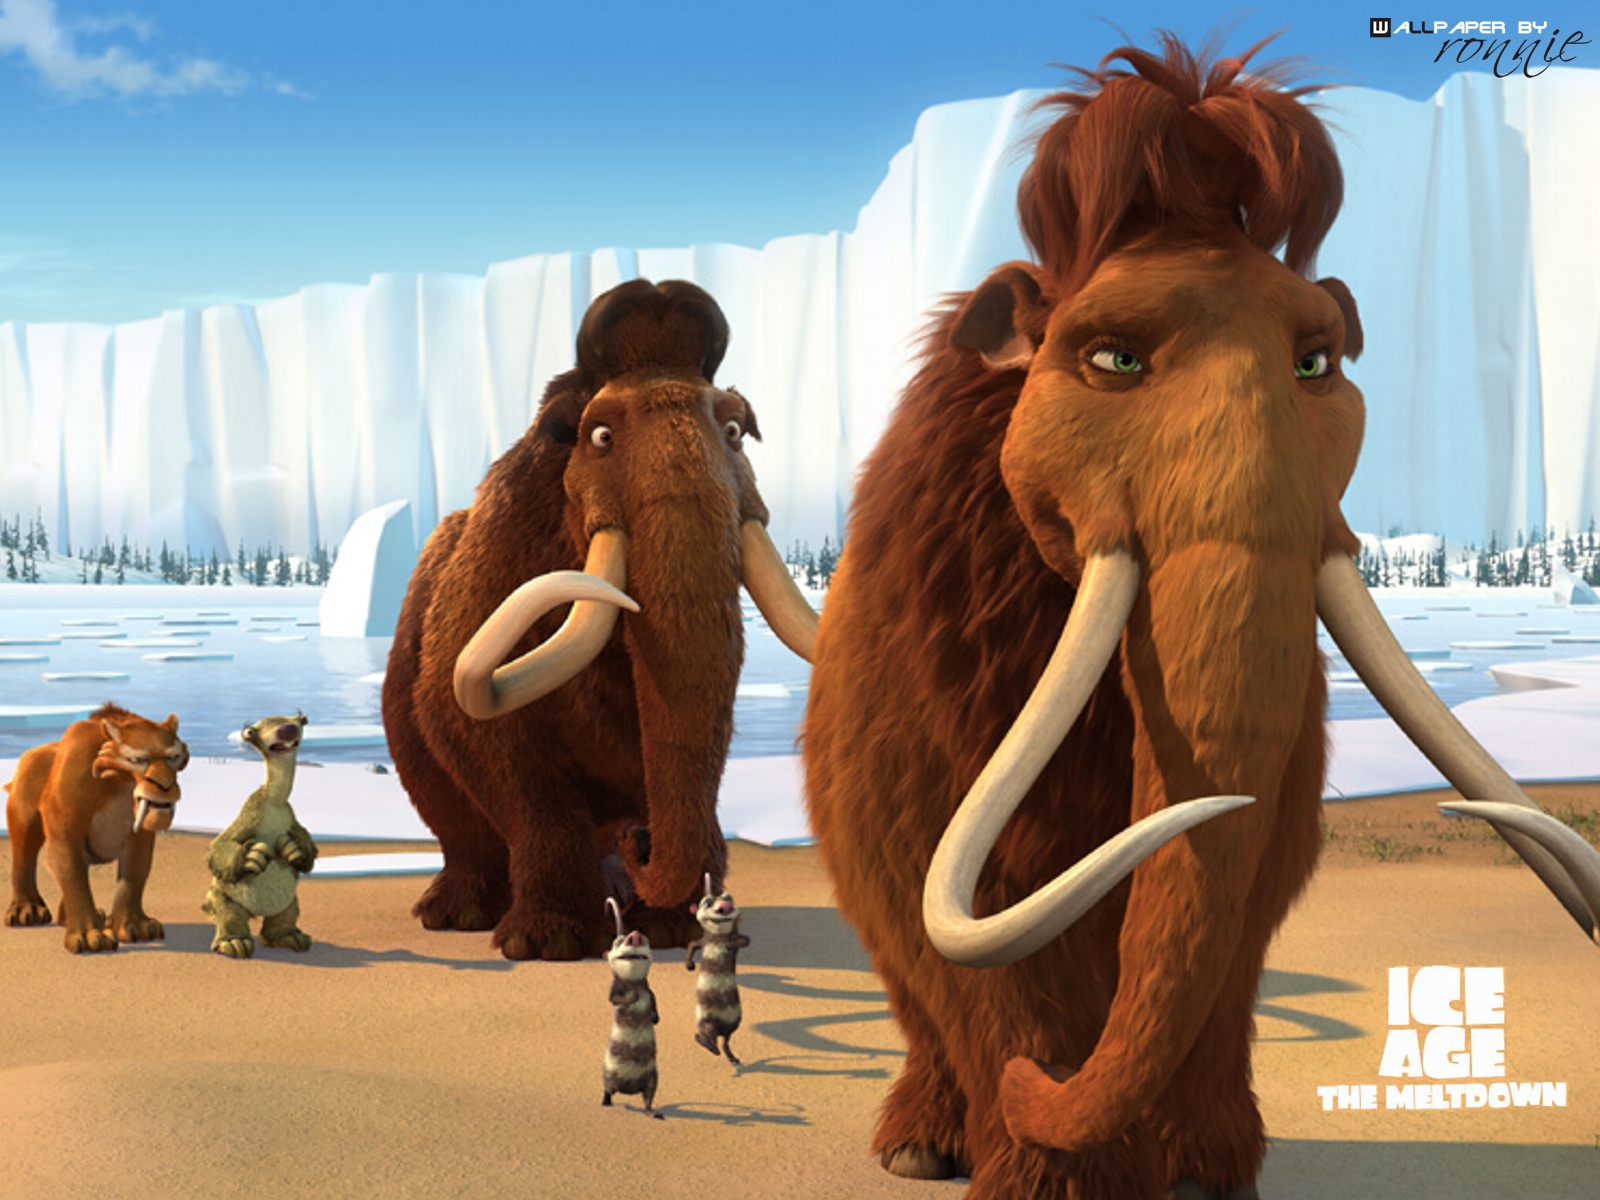 ice age 2 the meltdown full movie free download